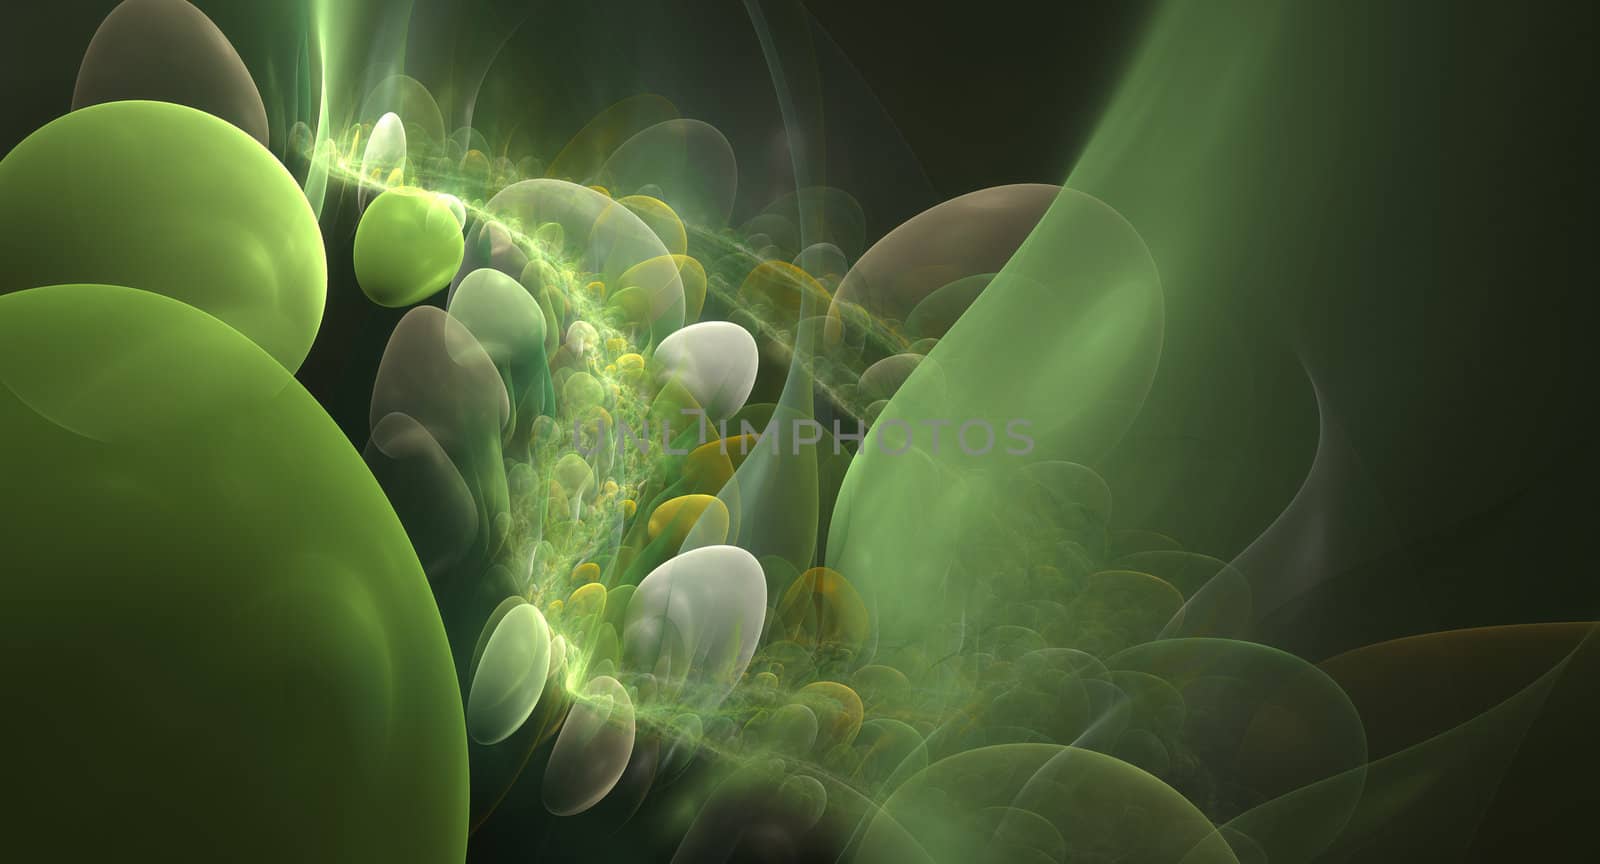 An image of a nice green fractal background